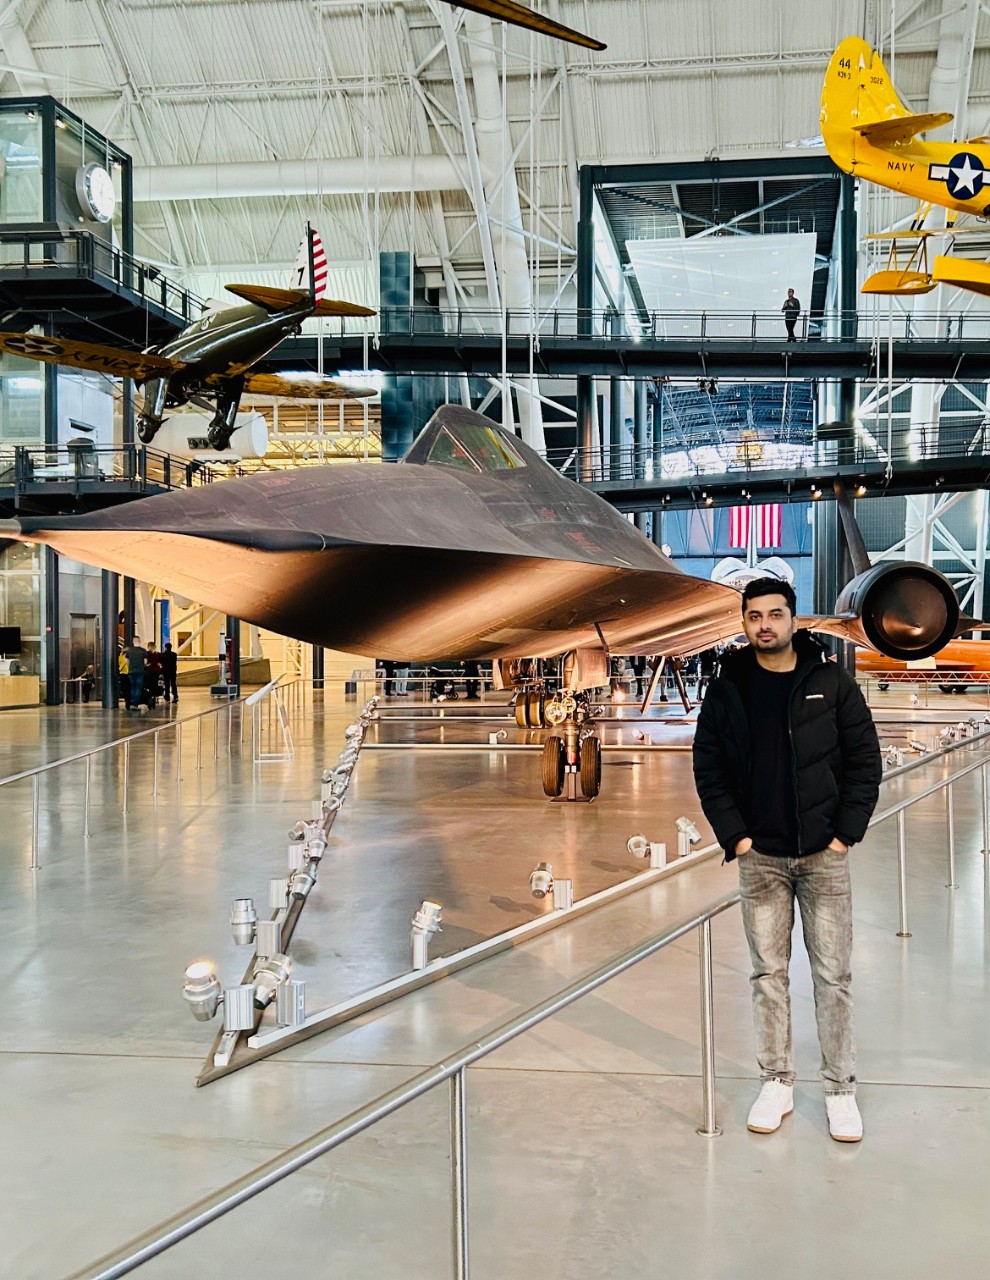 Saugat Ghimire poses in front of a plane at a museum